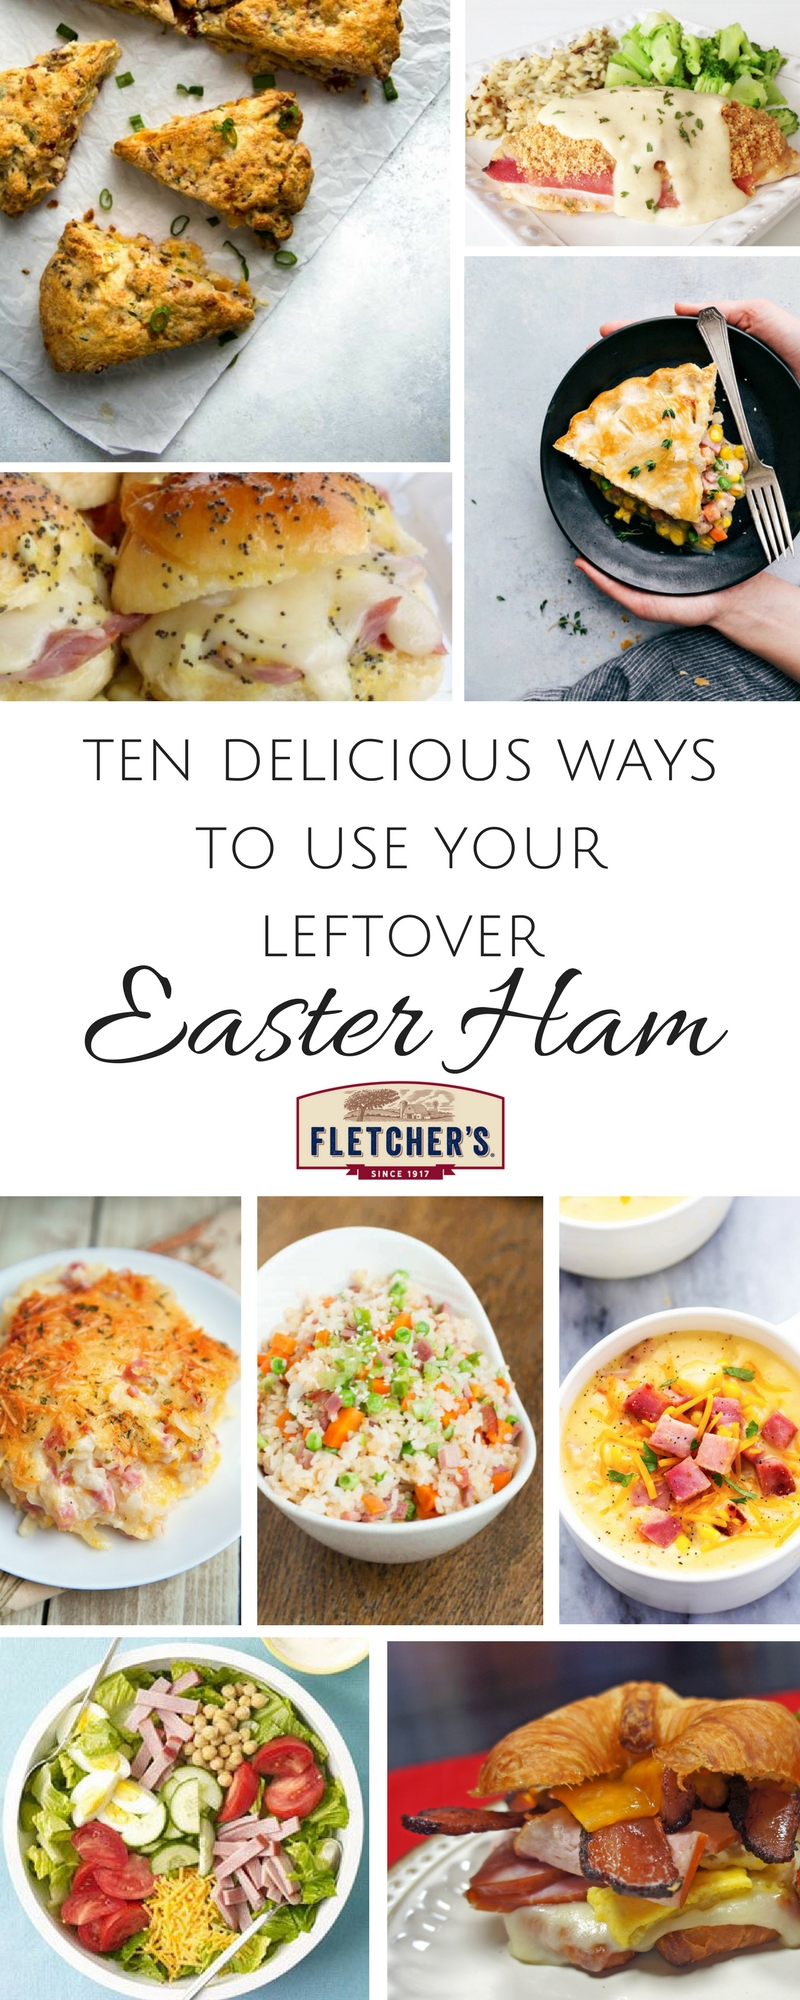 Leftover Ham Recipe Ideas - How to use up leftover Easter ham. #easter #leftovers #ham